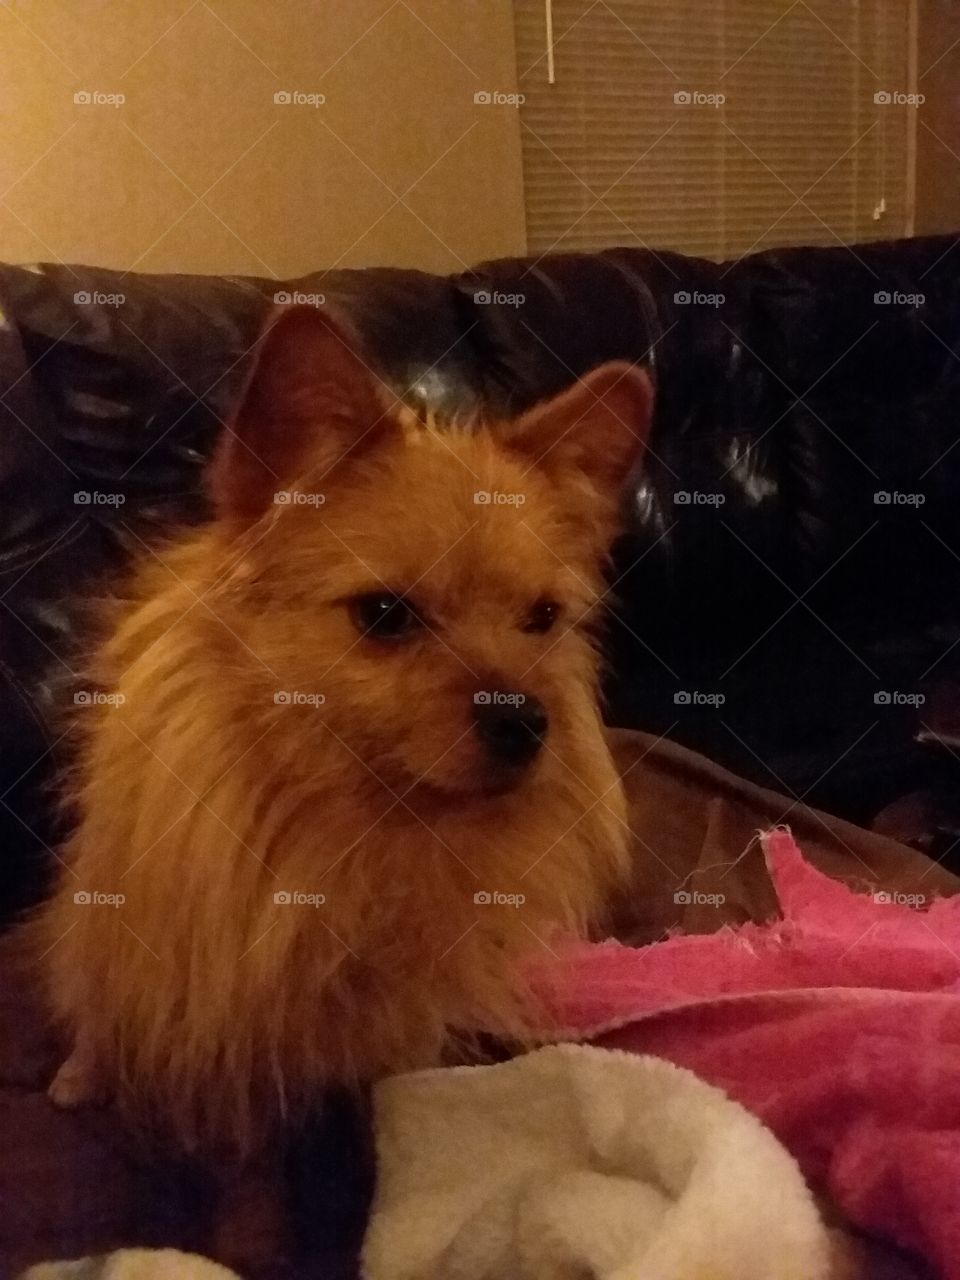 mixed with Yorki. Hes adorable, in my opinion.